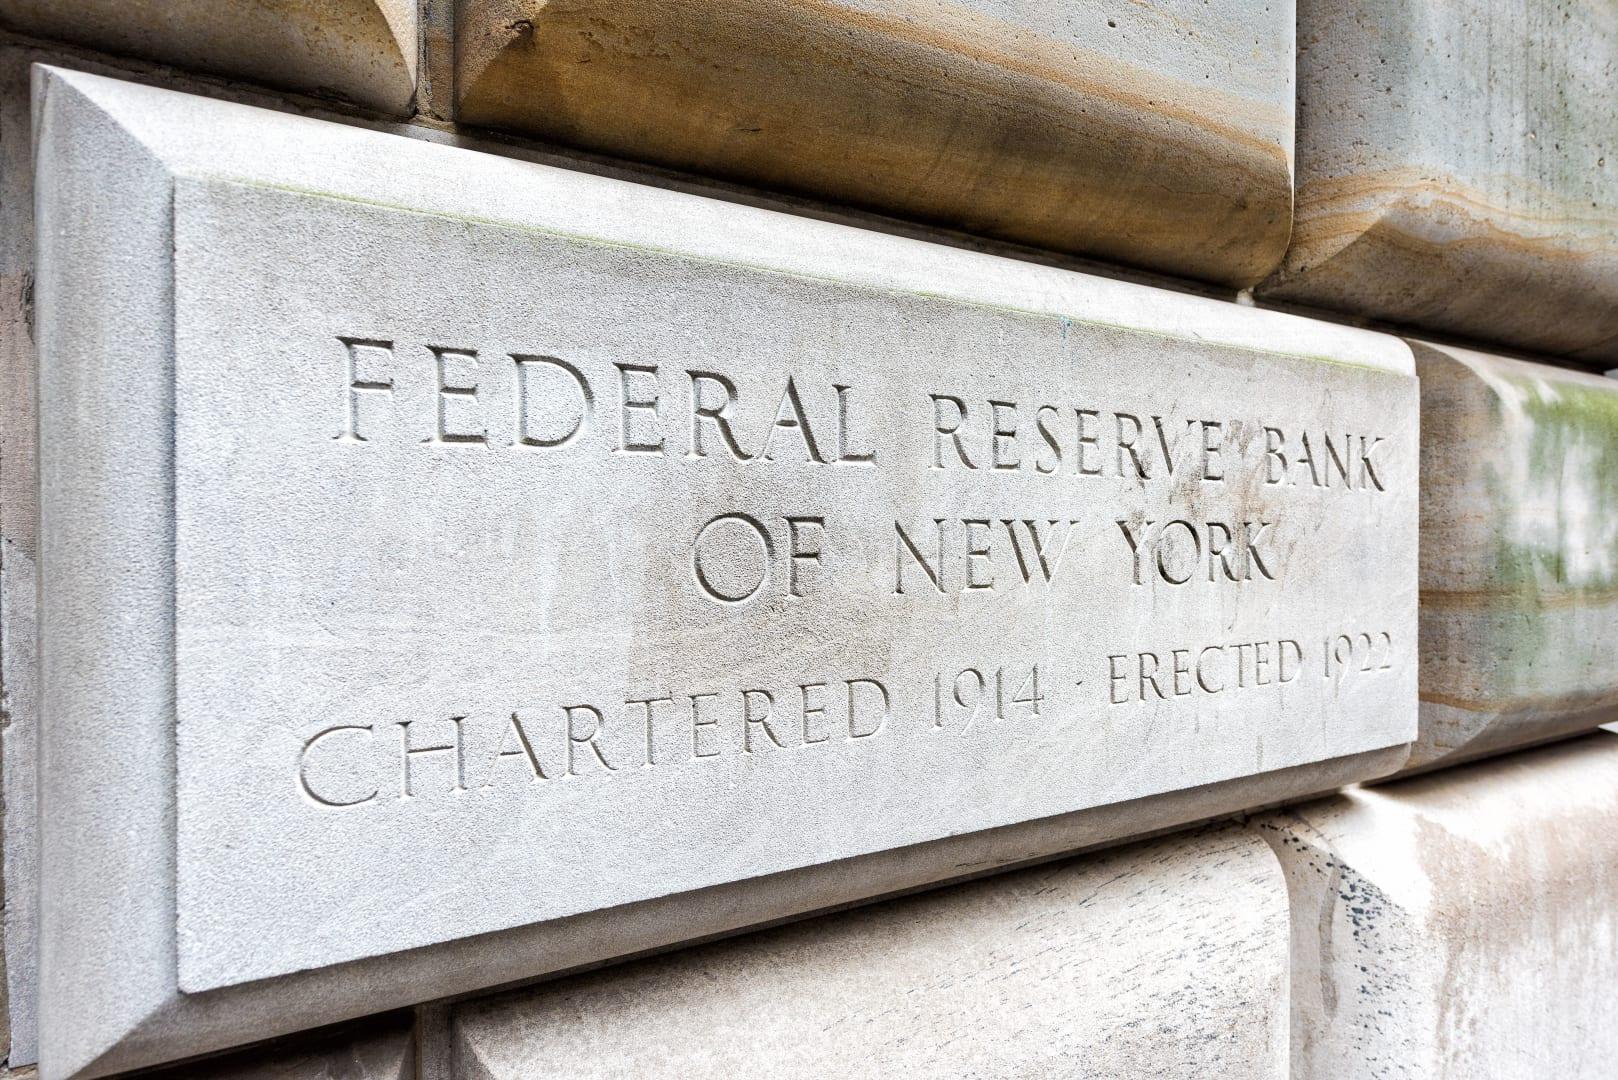 NY Federal Reserve begins digital currency simulations after crypto collapse